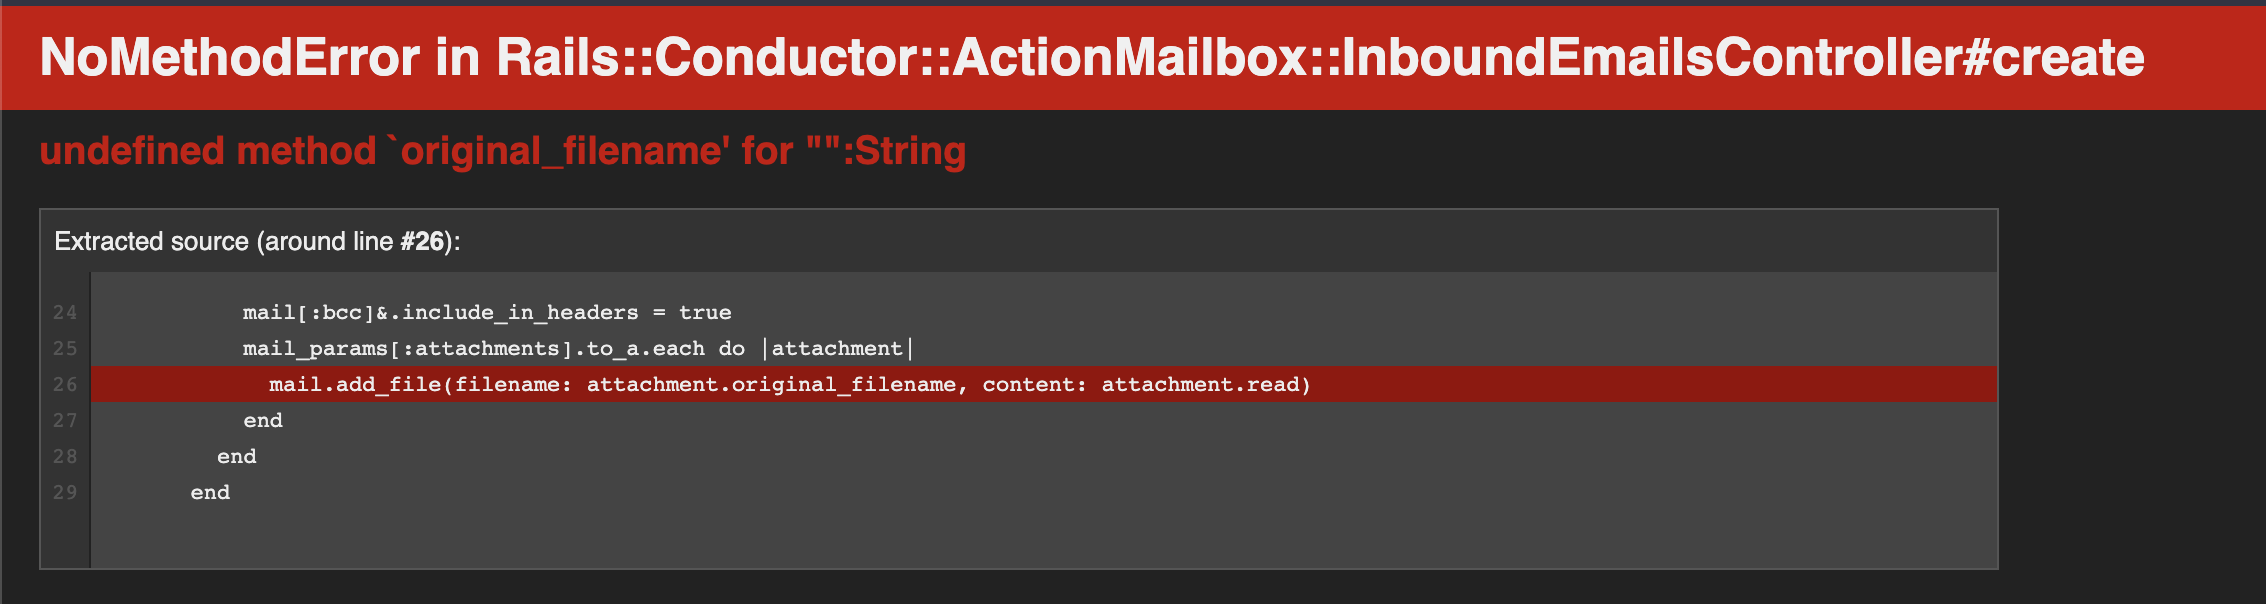 Error while testing action mailbox in development due to empty attachment